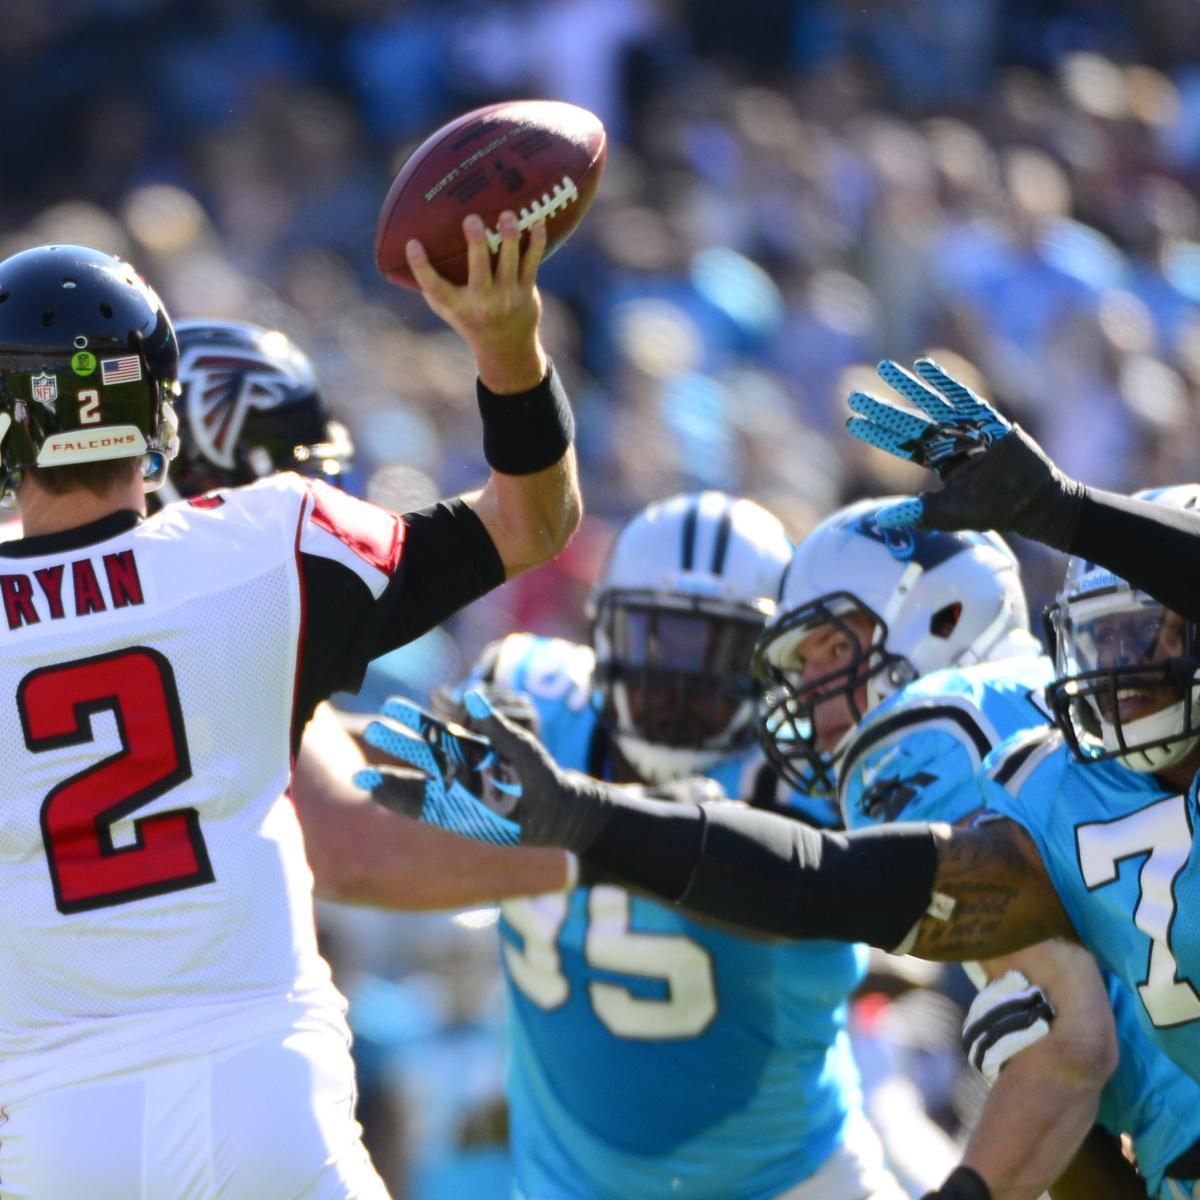 Panthers drop hard to 49ers stingy, top rated defense